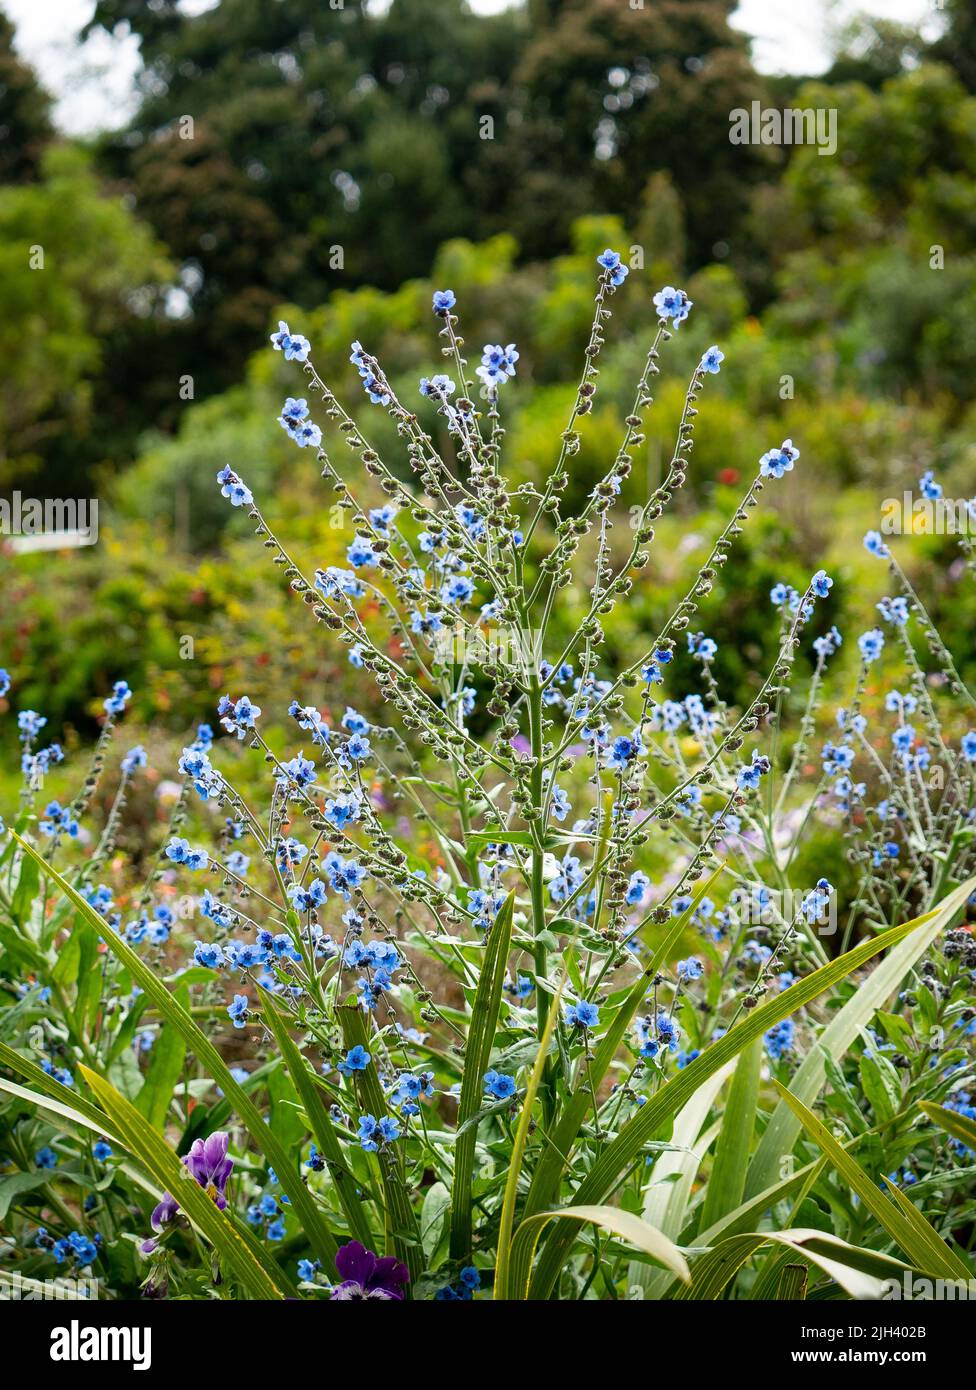 Blue Flowers Known as Chinese hound's tongue or Chinese forget-me-not (Cynoglossum amabile), in the Garden on a Cloudy Day Stock Photo